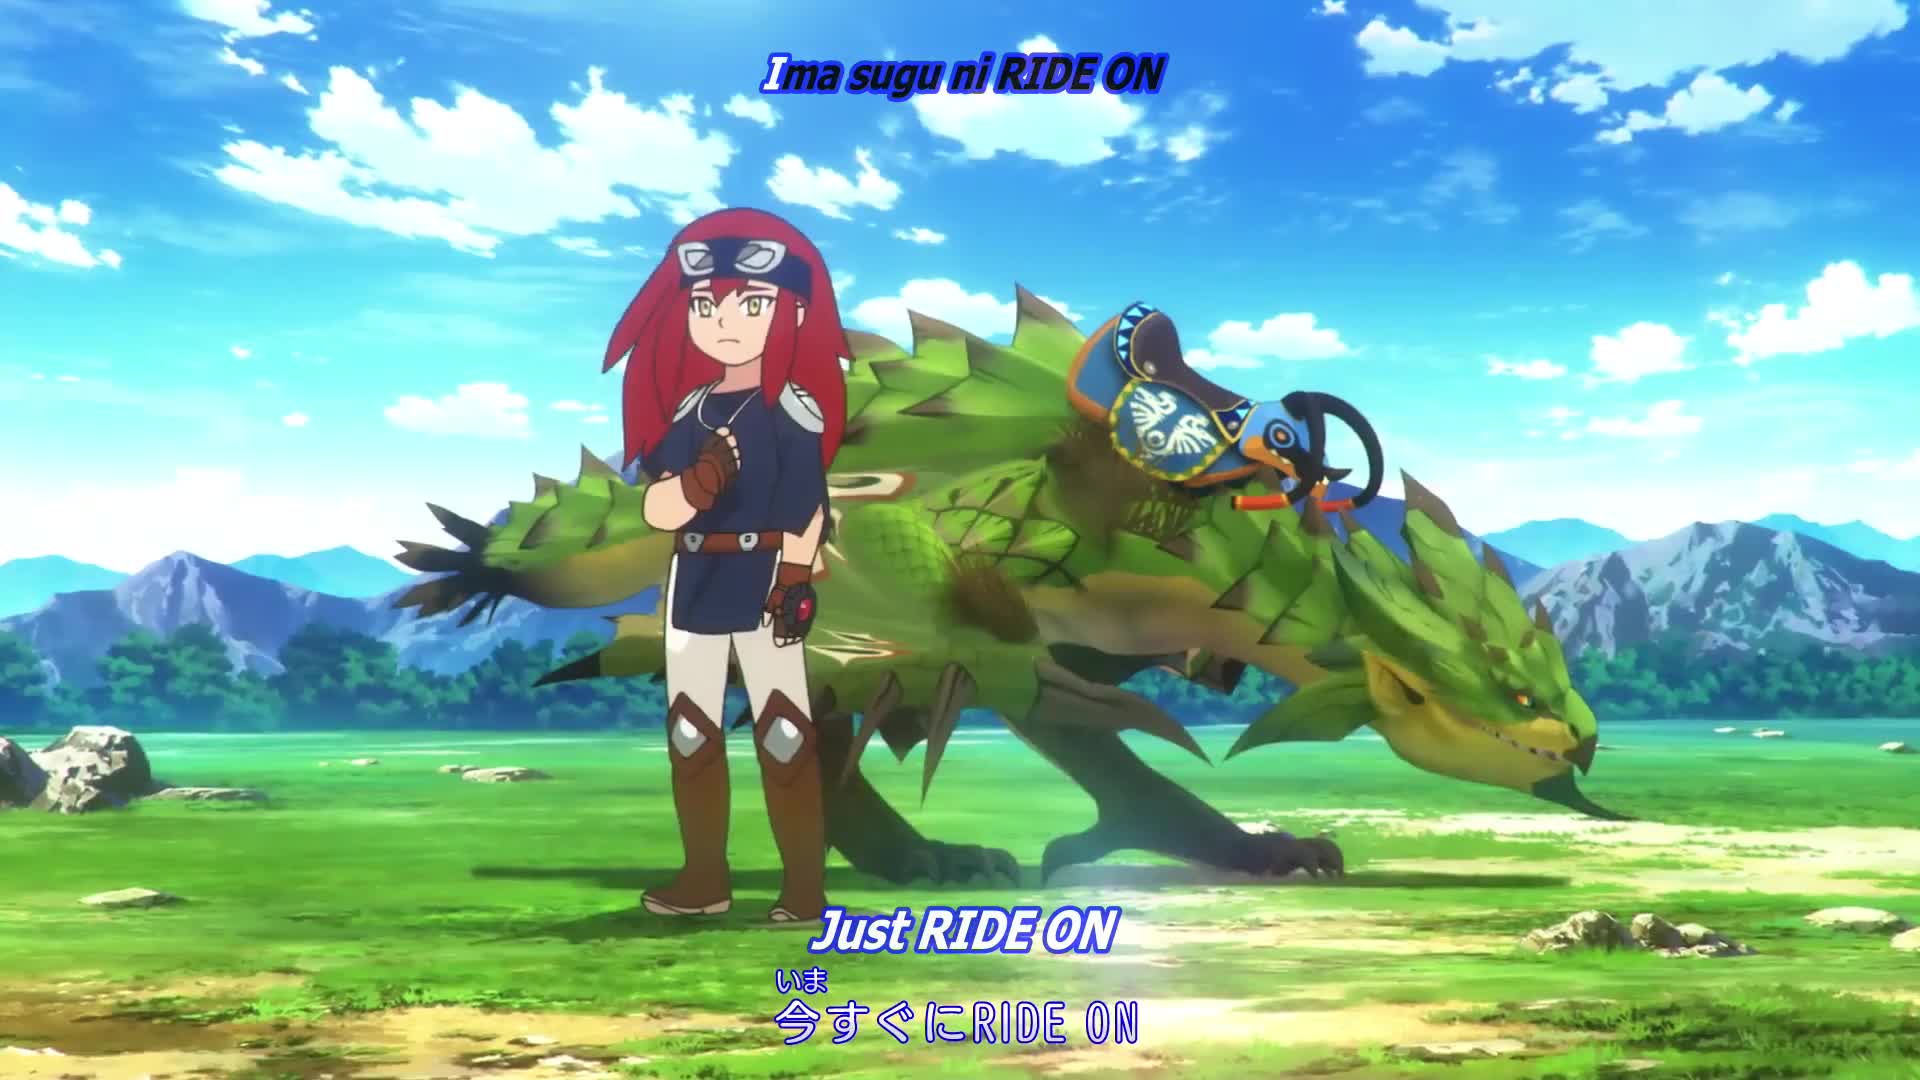 Watch Monster Hunter Stories Ride On Episode 7 English Subbed Online At Vidstreaming 8050